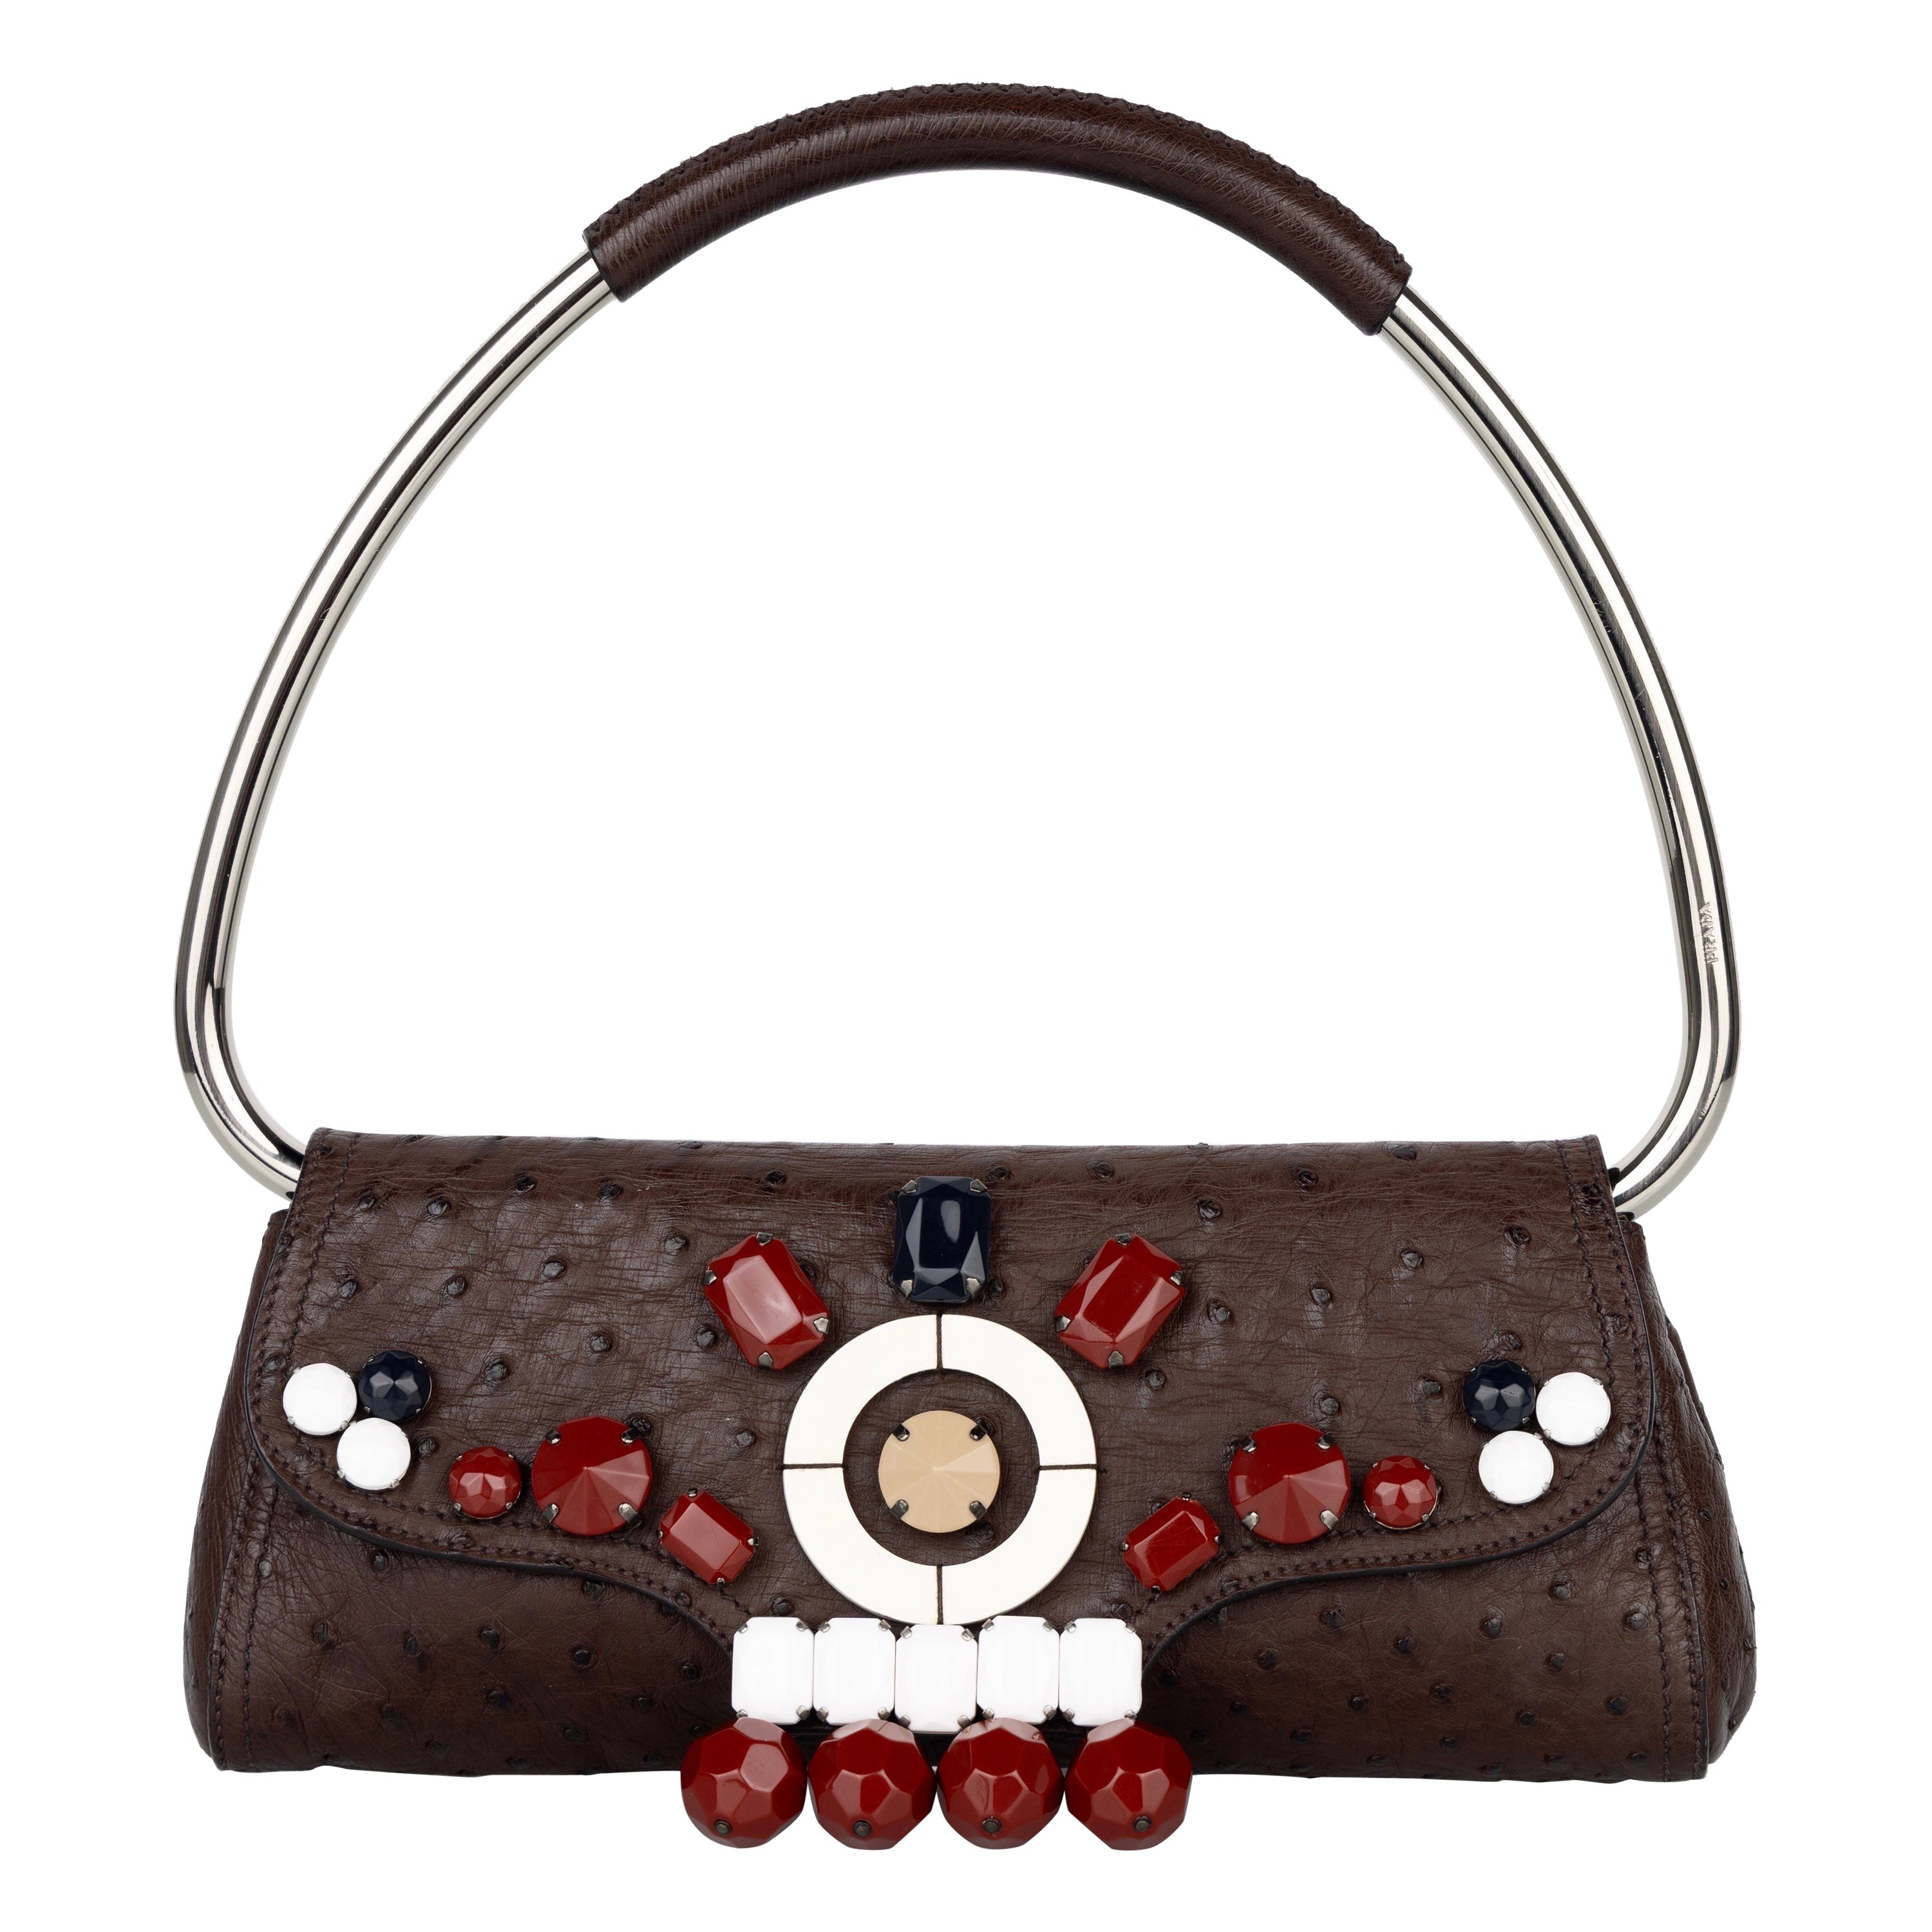 Prada Brown Ostrich Leather Jewel Embellished Swing Bag SS 2003 Archival Piece For Sale